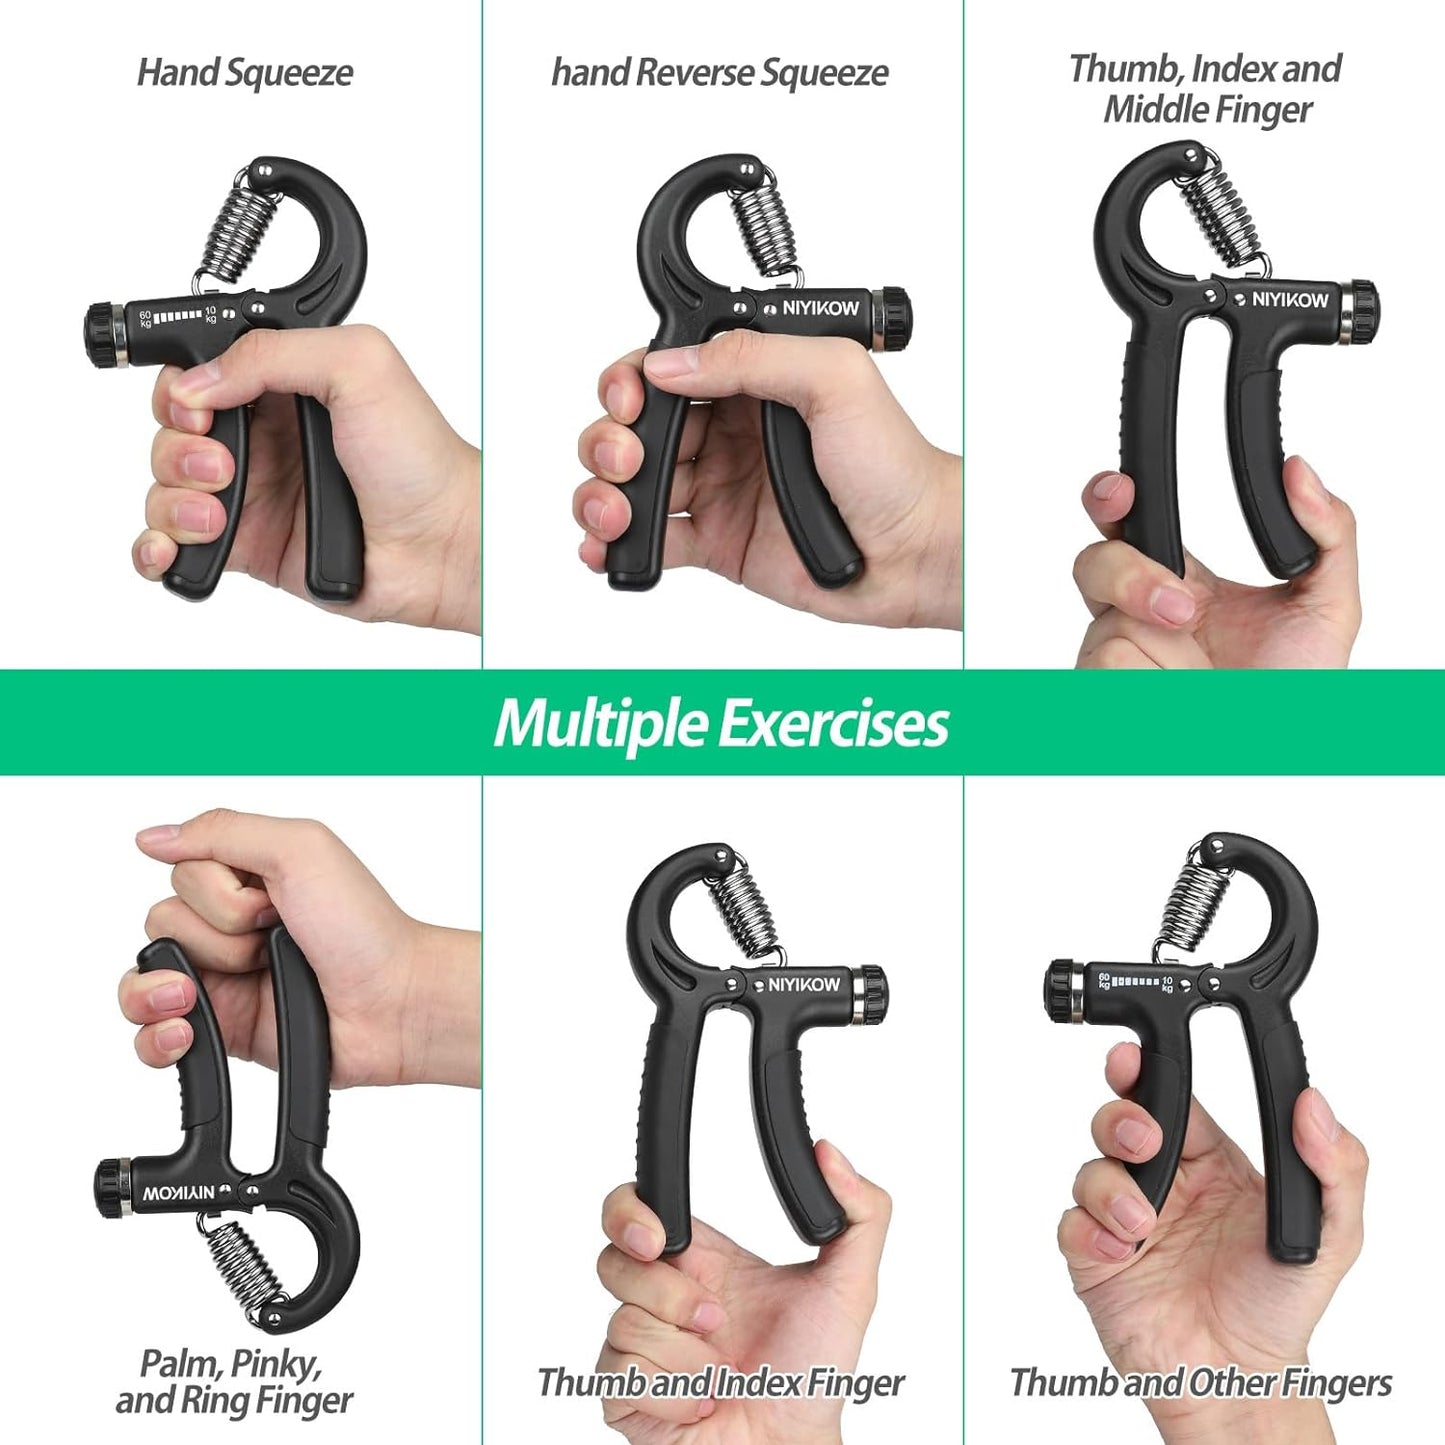 Grip Strength Trainer, Hand Grip Strengthener, Adjustable Resistance 22-132Lbs (10-60Kg), Forearm Strengthener, Perfect for Musicians Athletes and Hand Injury Recovery